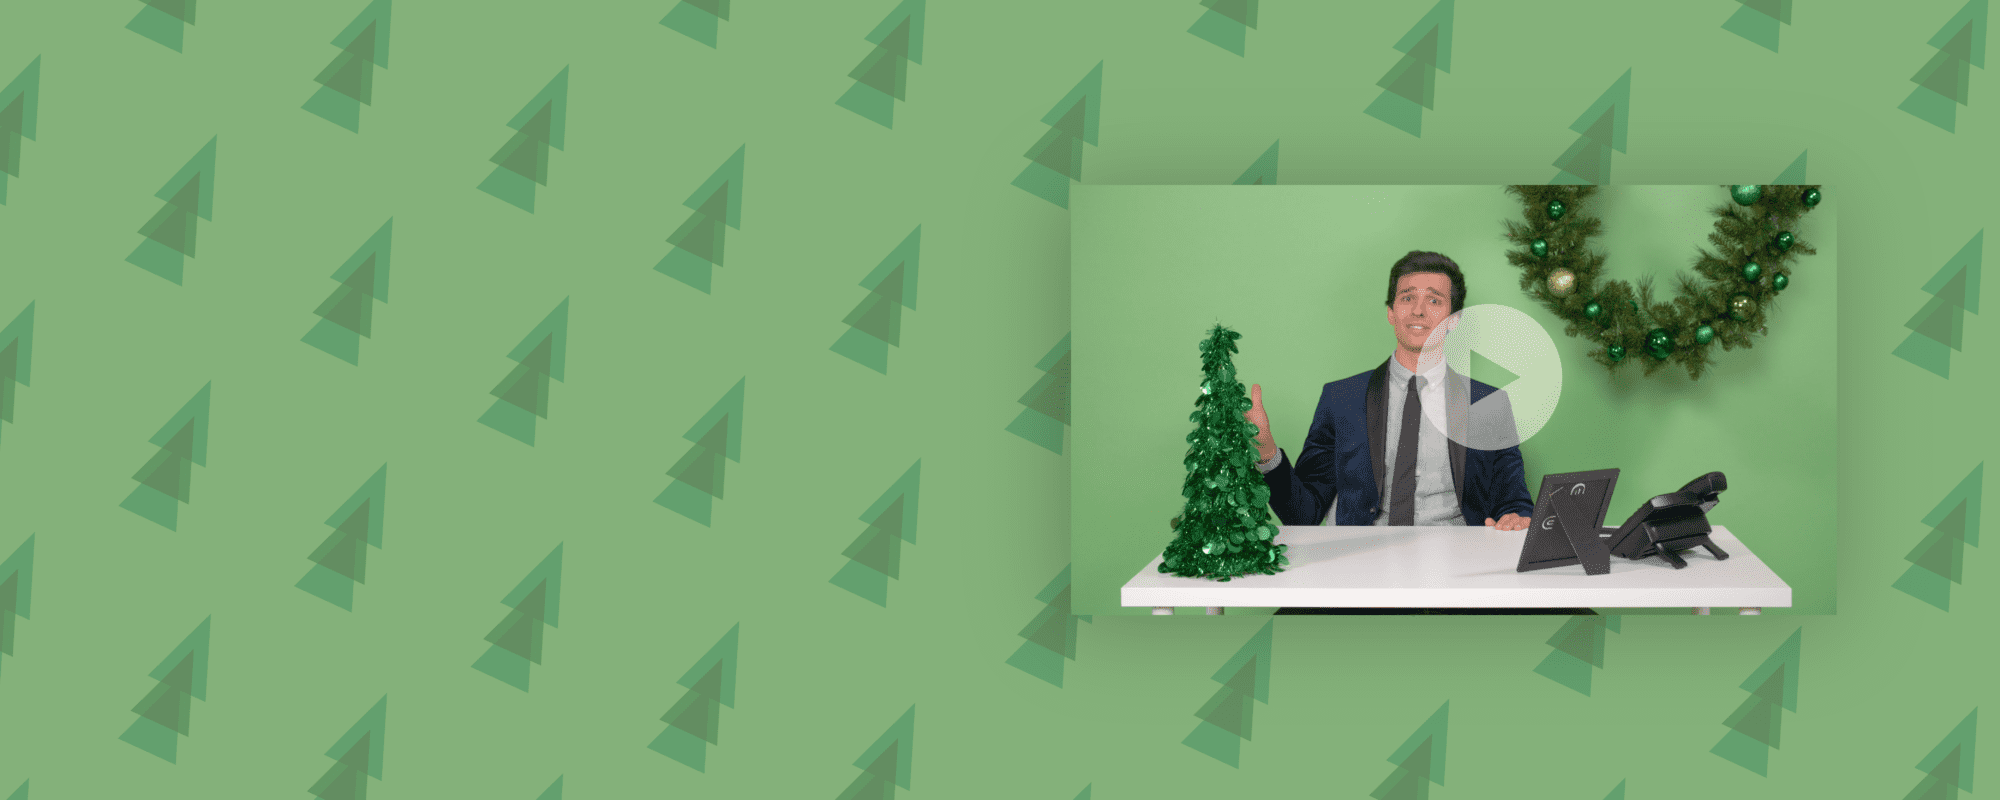 Header Image with a Green Background with cartoon patterned Christmas Trees, thumbnail for the video with a man in a suit at a desk with Christmas decorations on it.